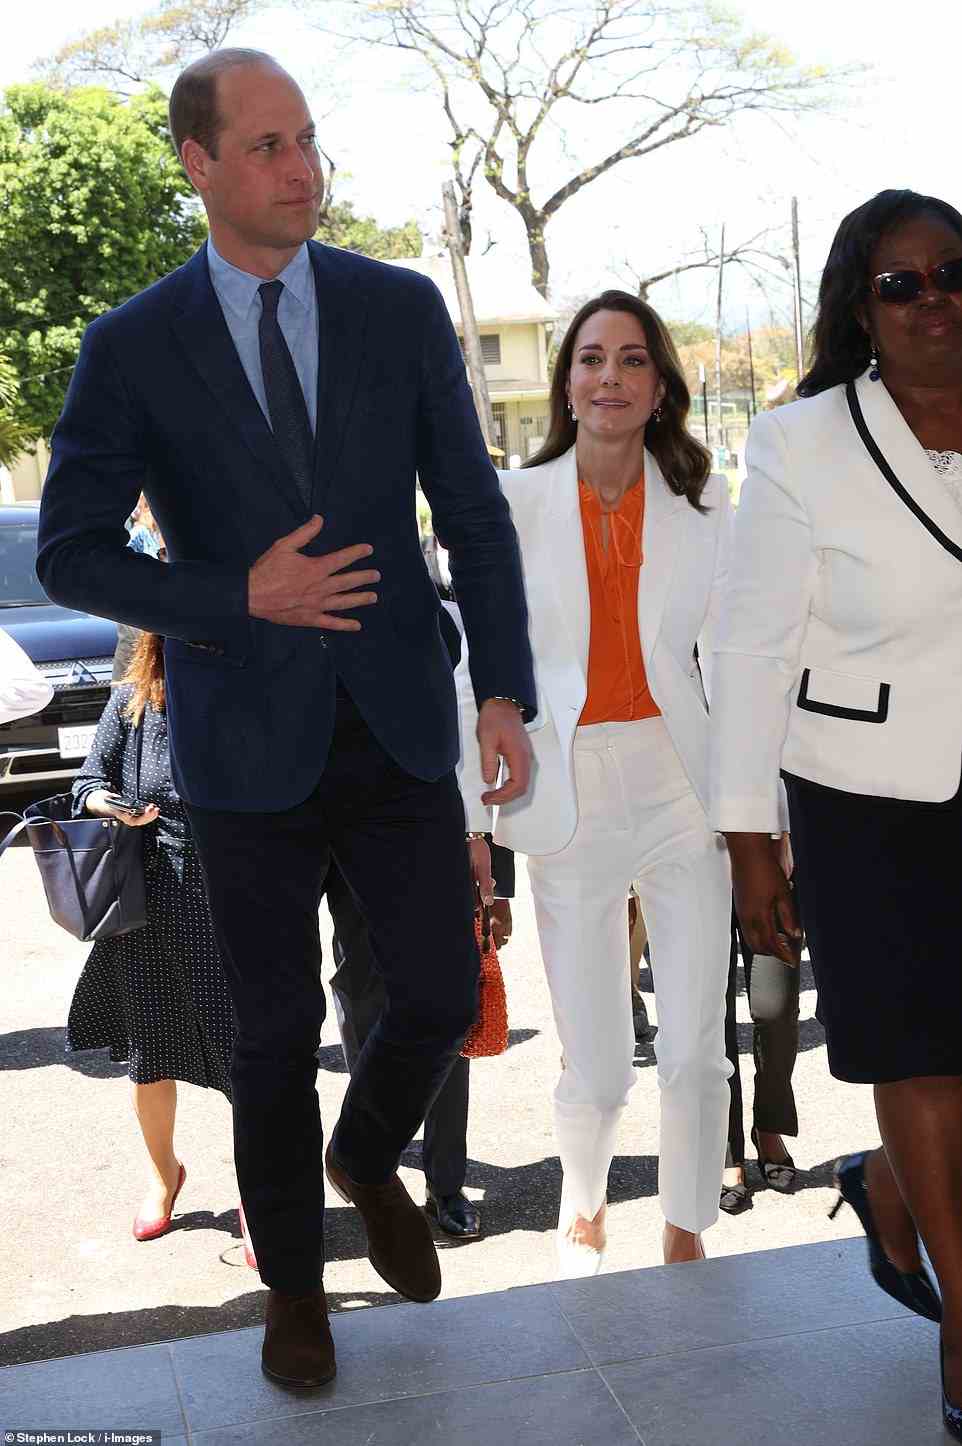 Prince William and Kate Middleton, the Duke and Duchess of Cambridge, during a visit to Shortwood Teacher's College in Kingston, Jamaica, on day five of their Royal Tour of the Caribbean